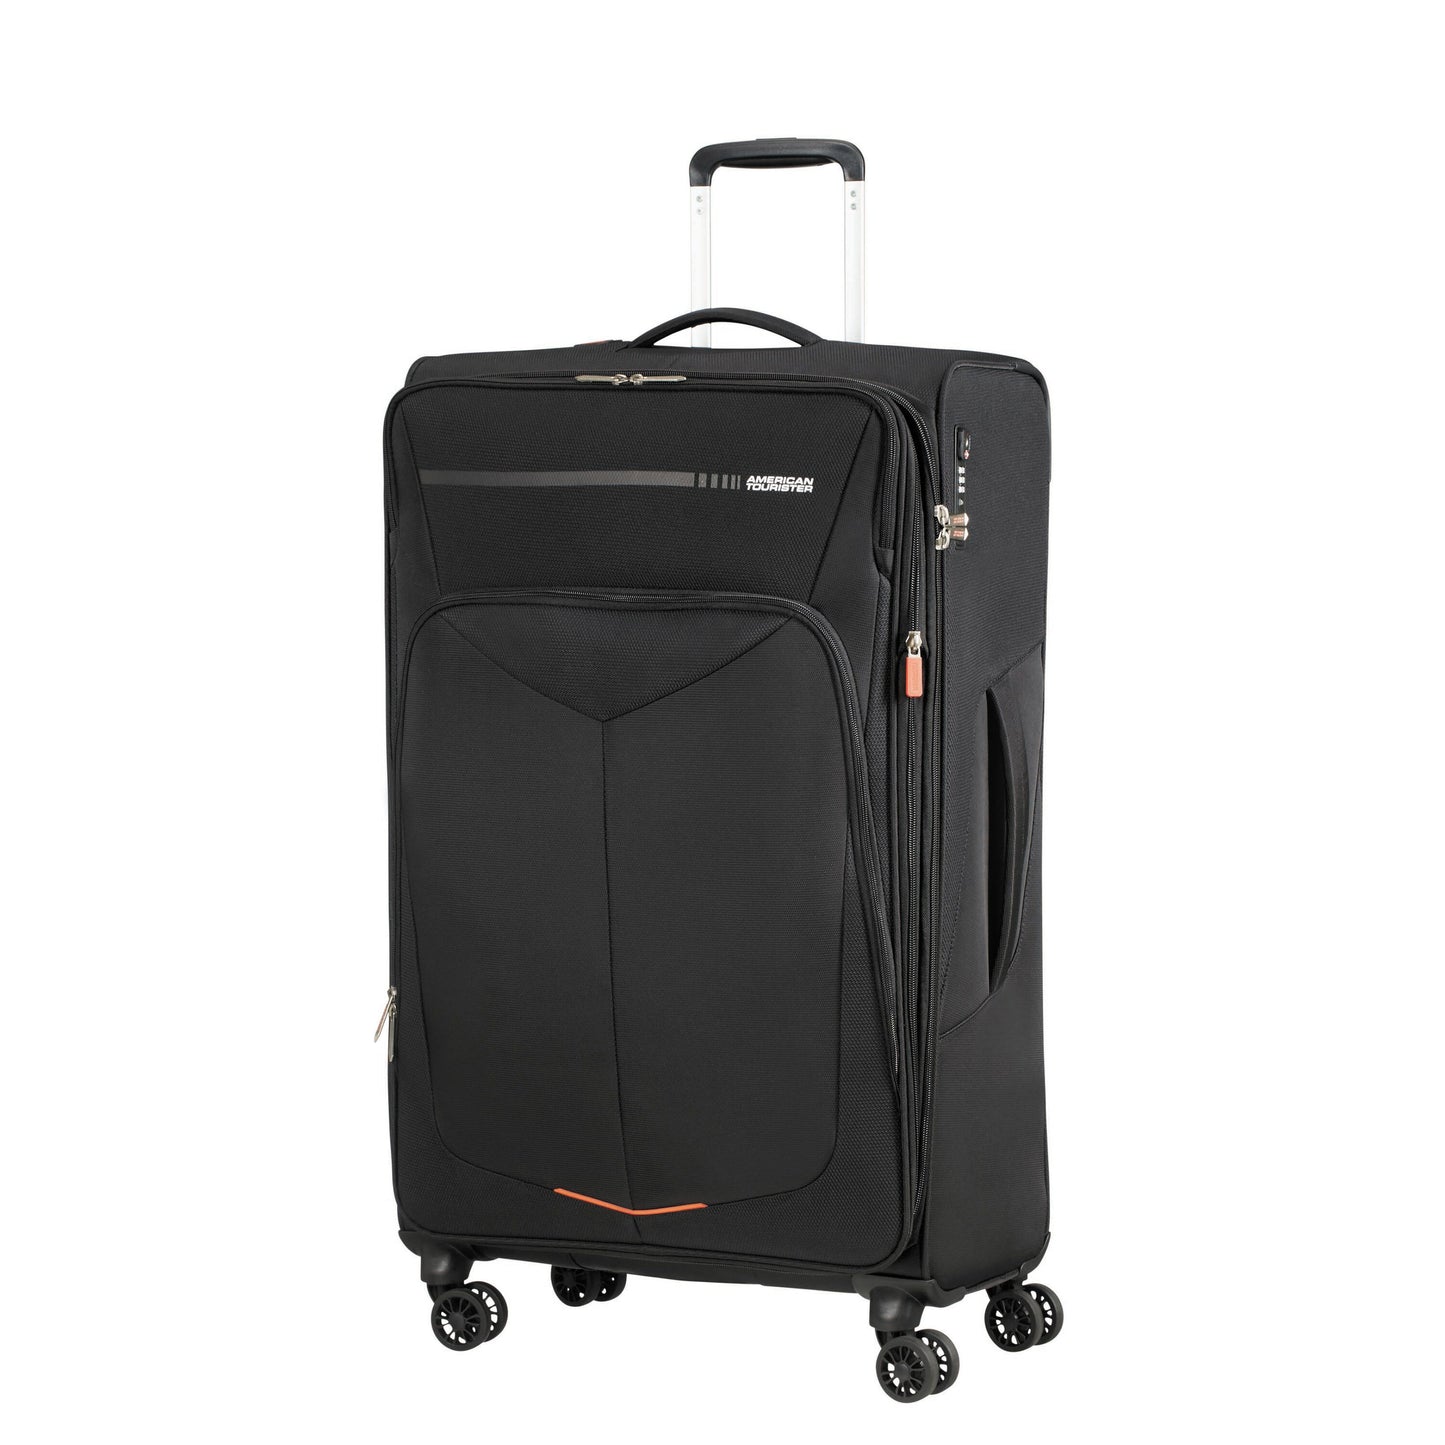 American Tourister Fly Light Spinner Suitcases